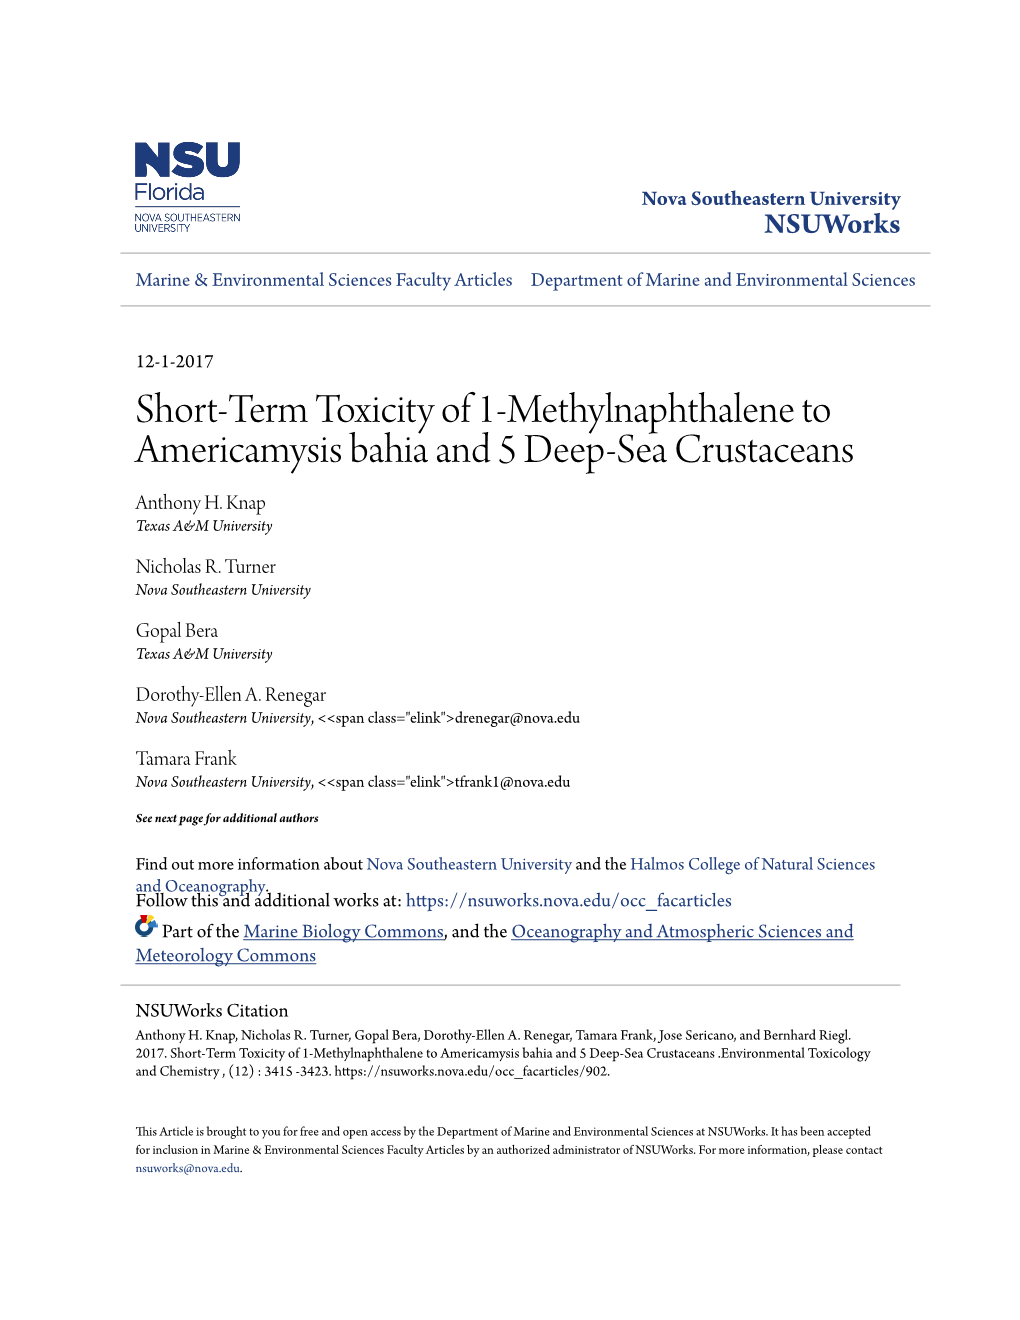 Short-Term Toxicity of 1-Methylnaphthalene to Americamysis Bahia and 5 Deep-Sea Crustaceans Anthony H